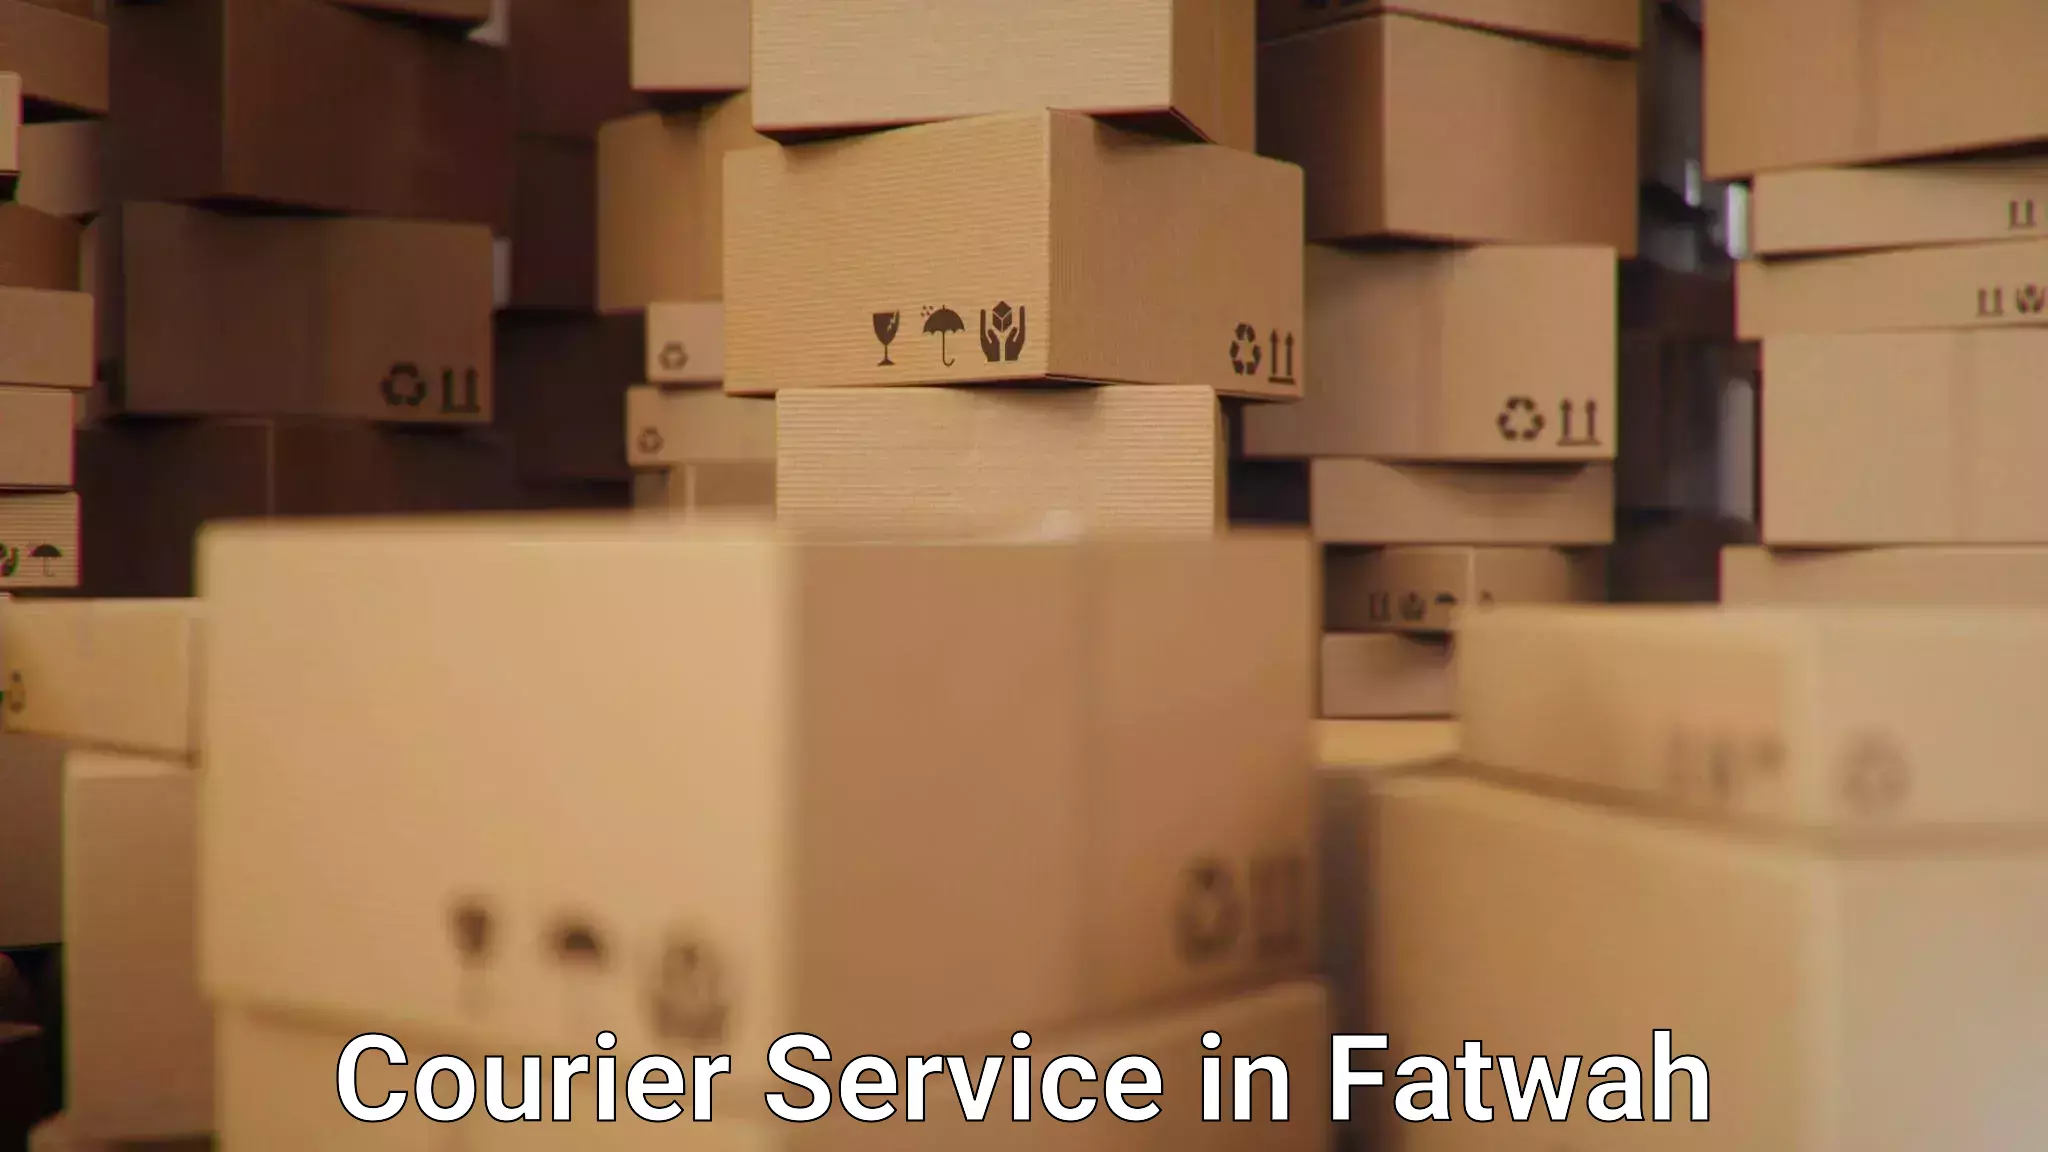 Rapid freight solutions in Fatwah